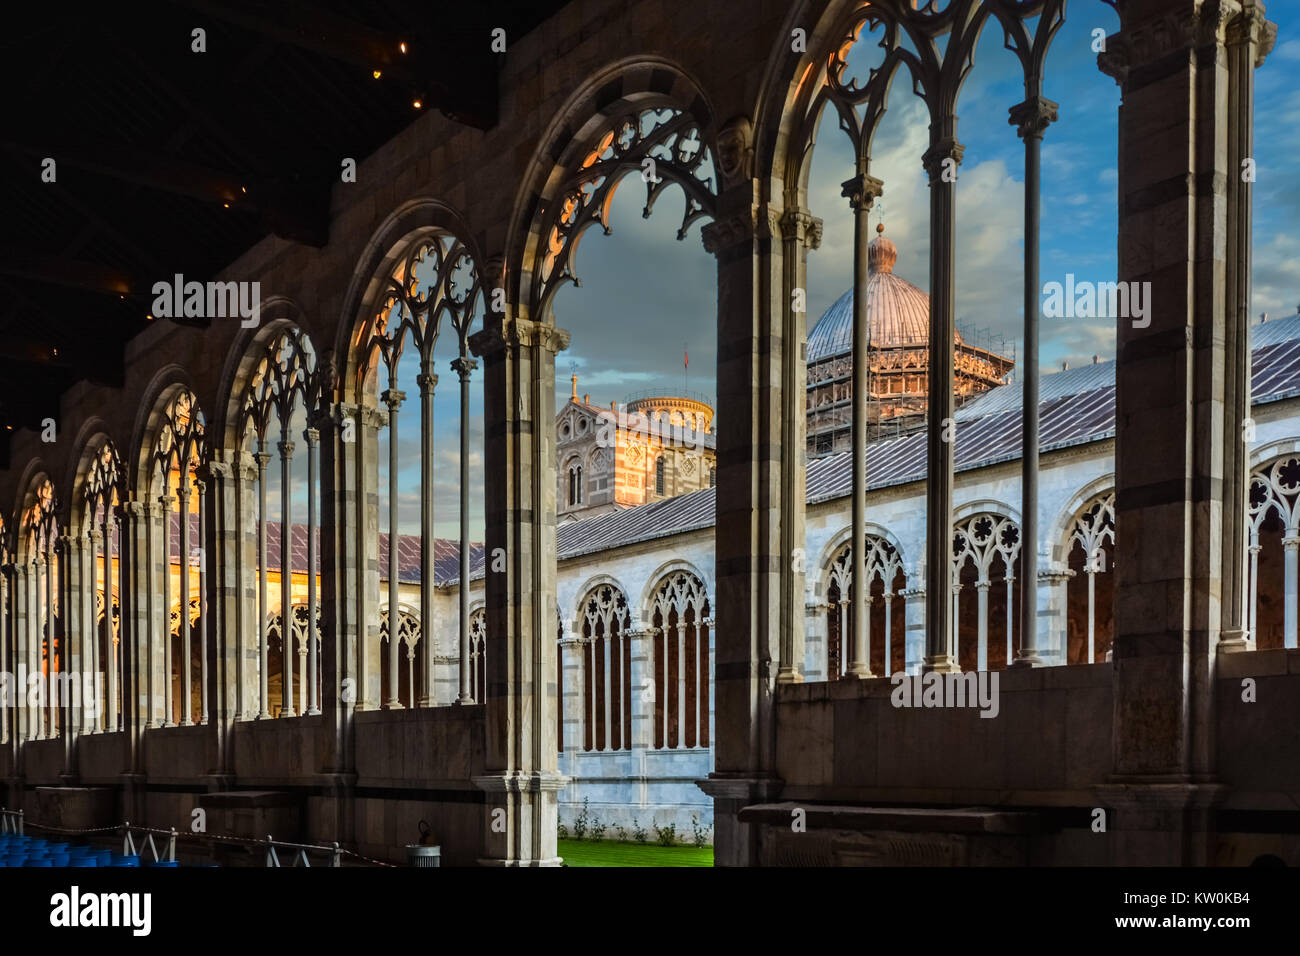 The Camposanto Monumentale in the Square of Miracles in Pisa Italy with the Duomo cathedral in the distance and the Chamber of Relics Stock Photo